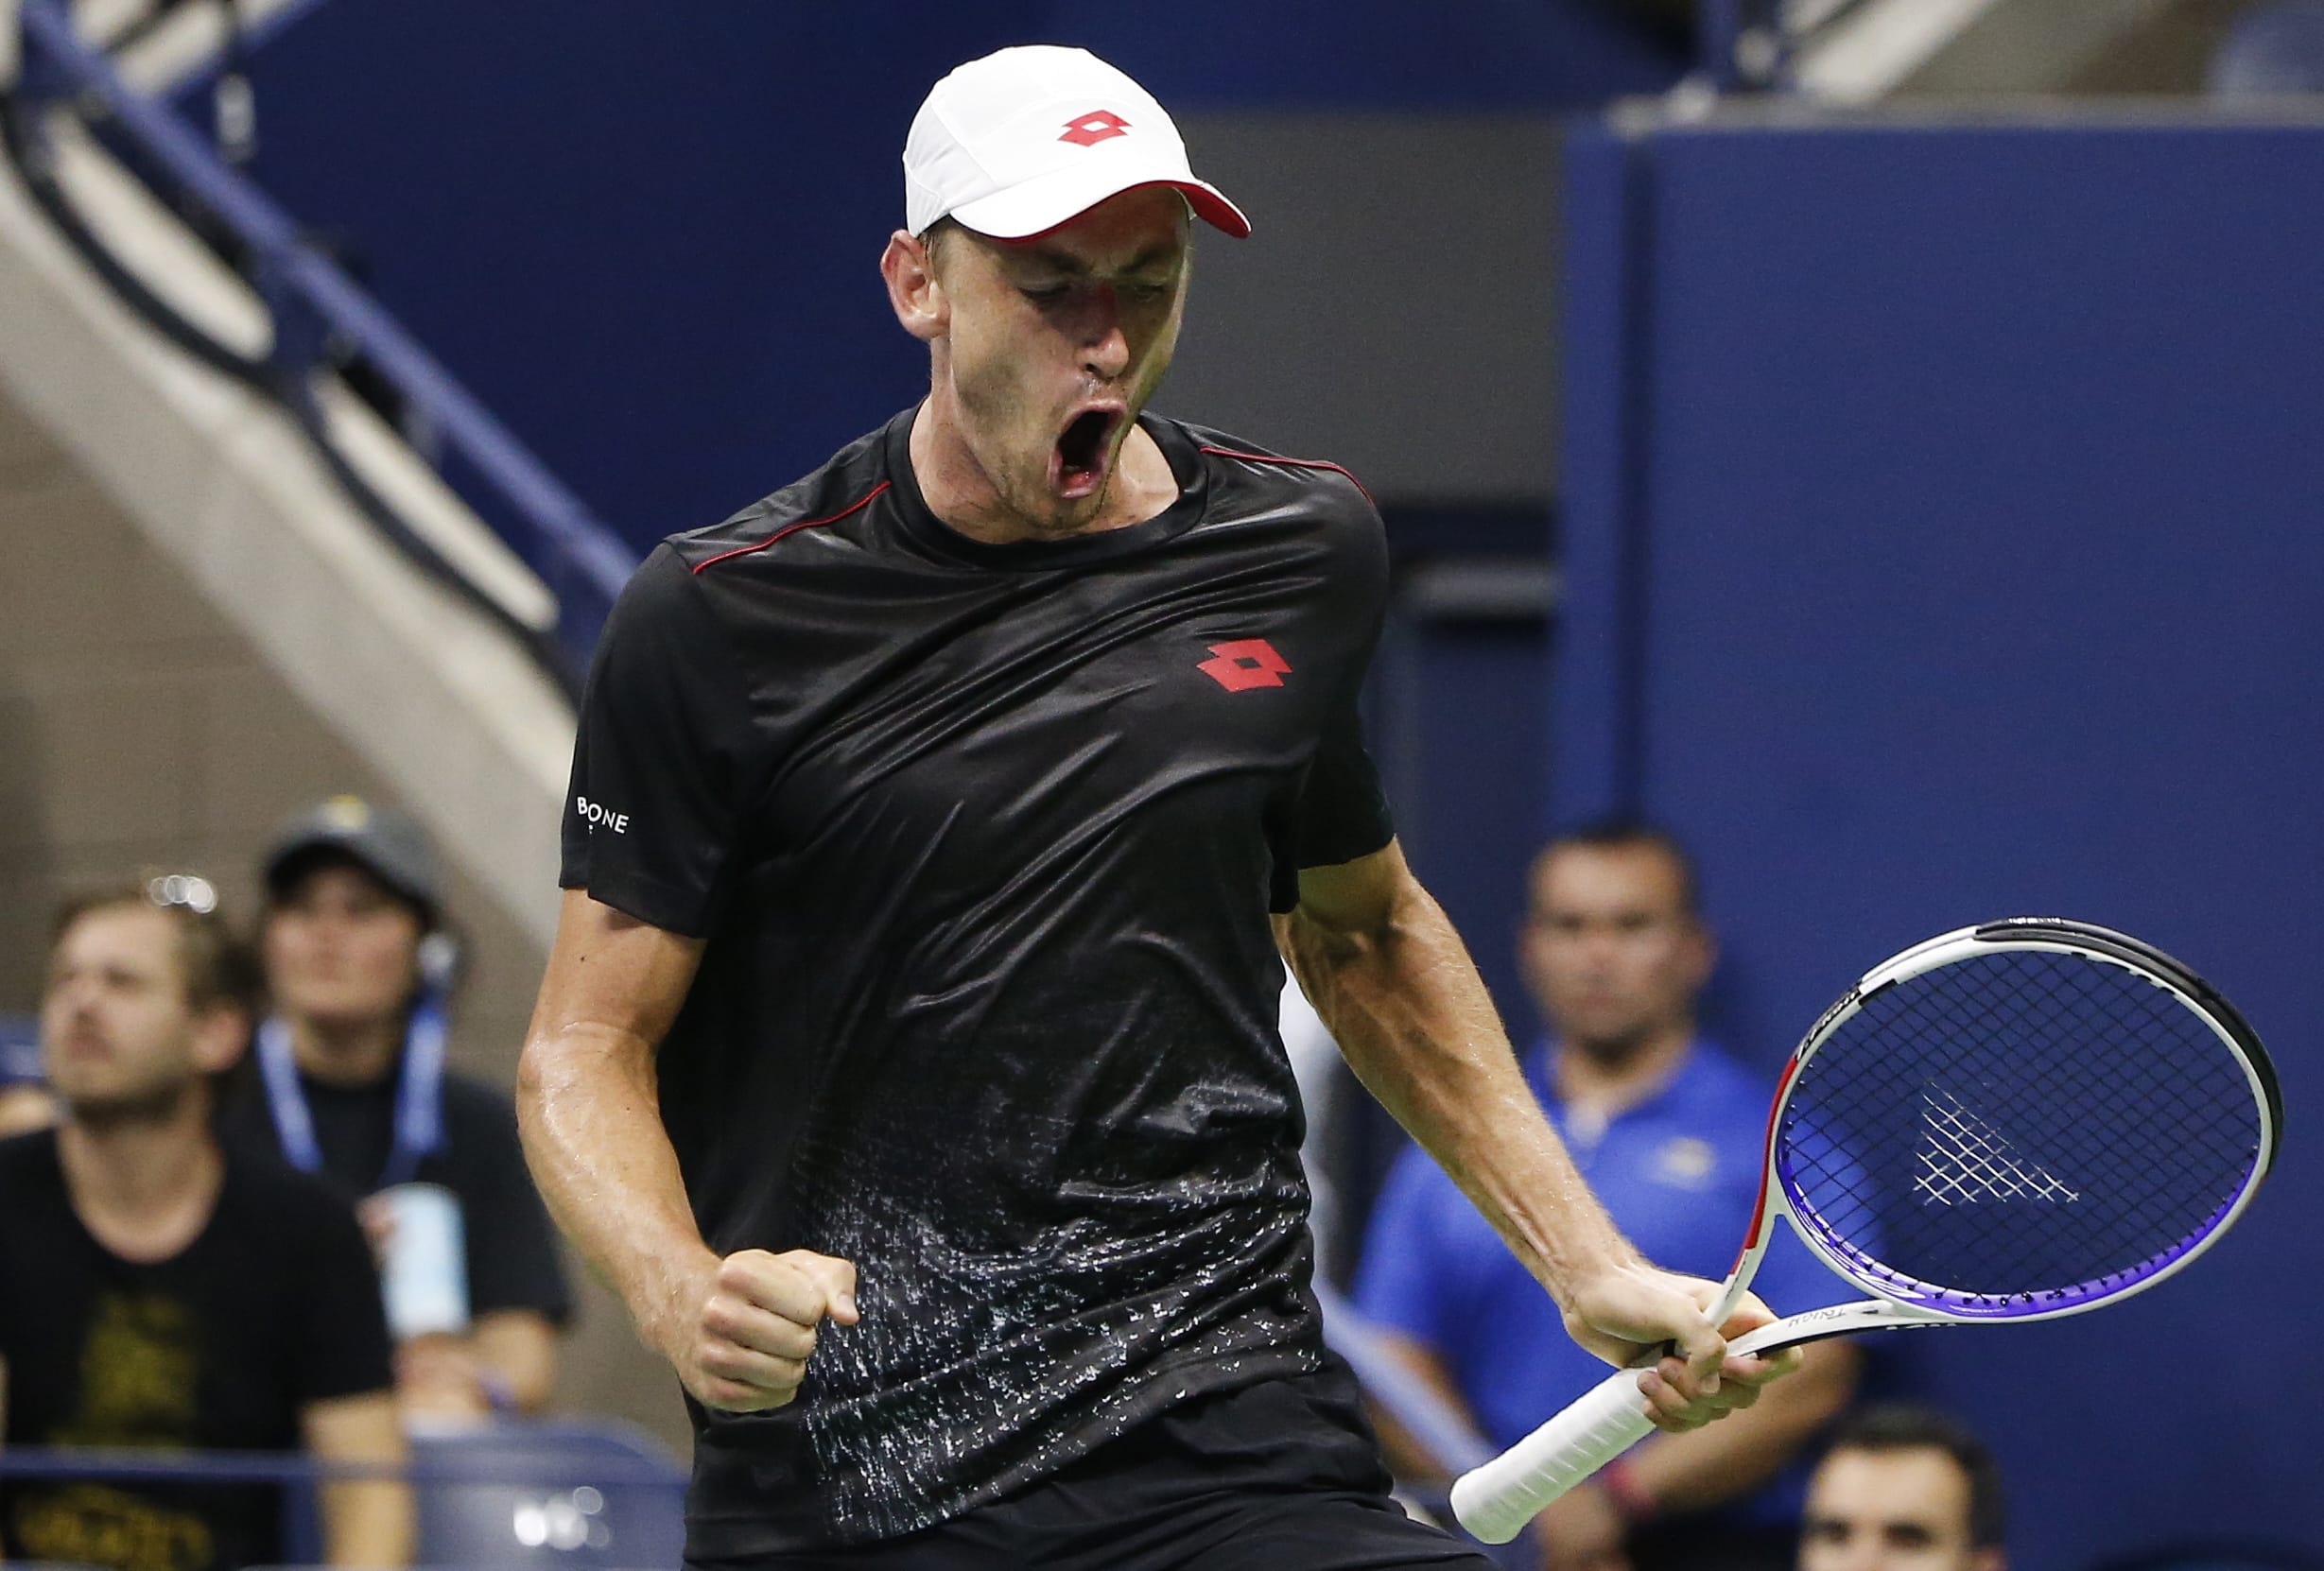 John Millman, of Australia, reacts after winning a point against Roger Federer, of Switzerland, during the fourth round of the U.S. Open tennis tournament, Monday, Sept. 3, 2018, in New York.